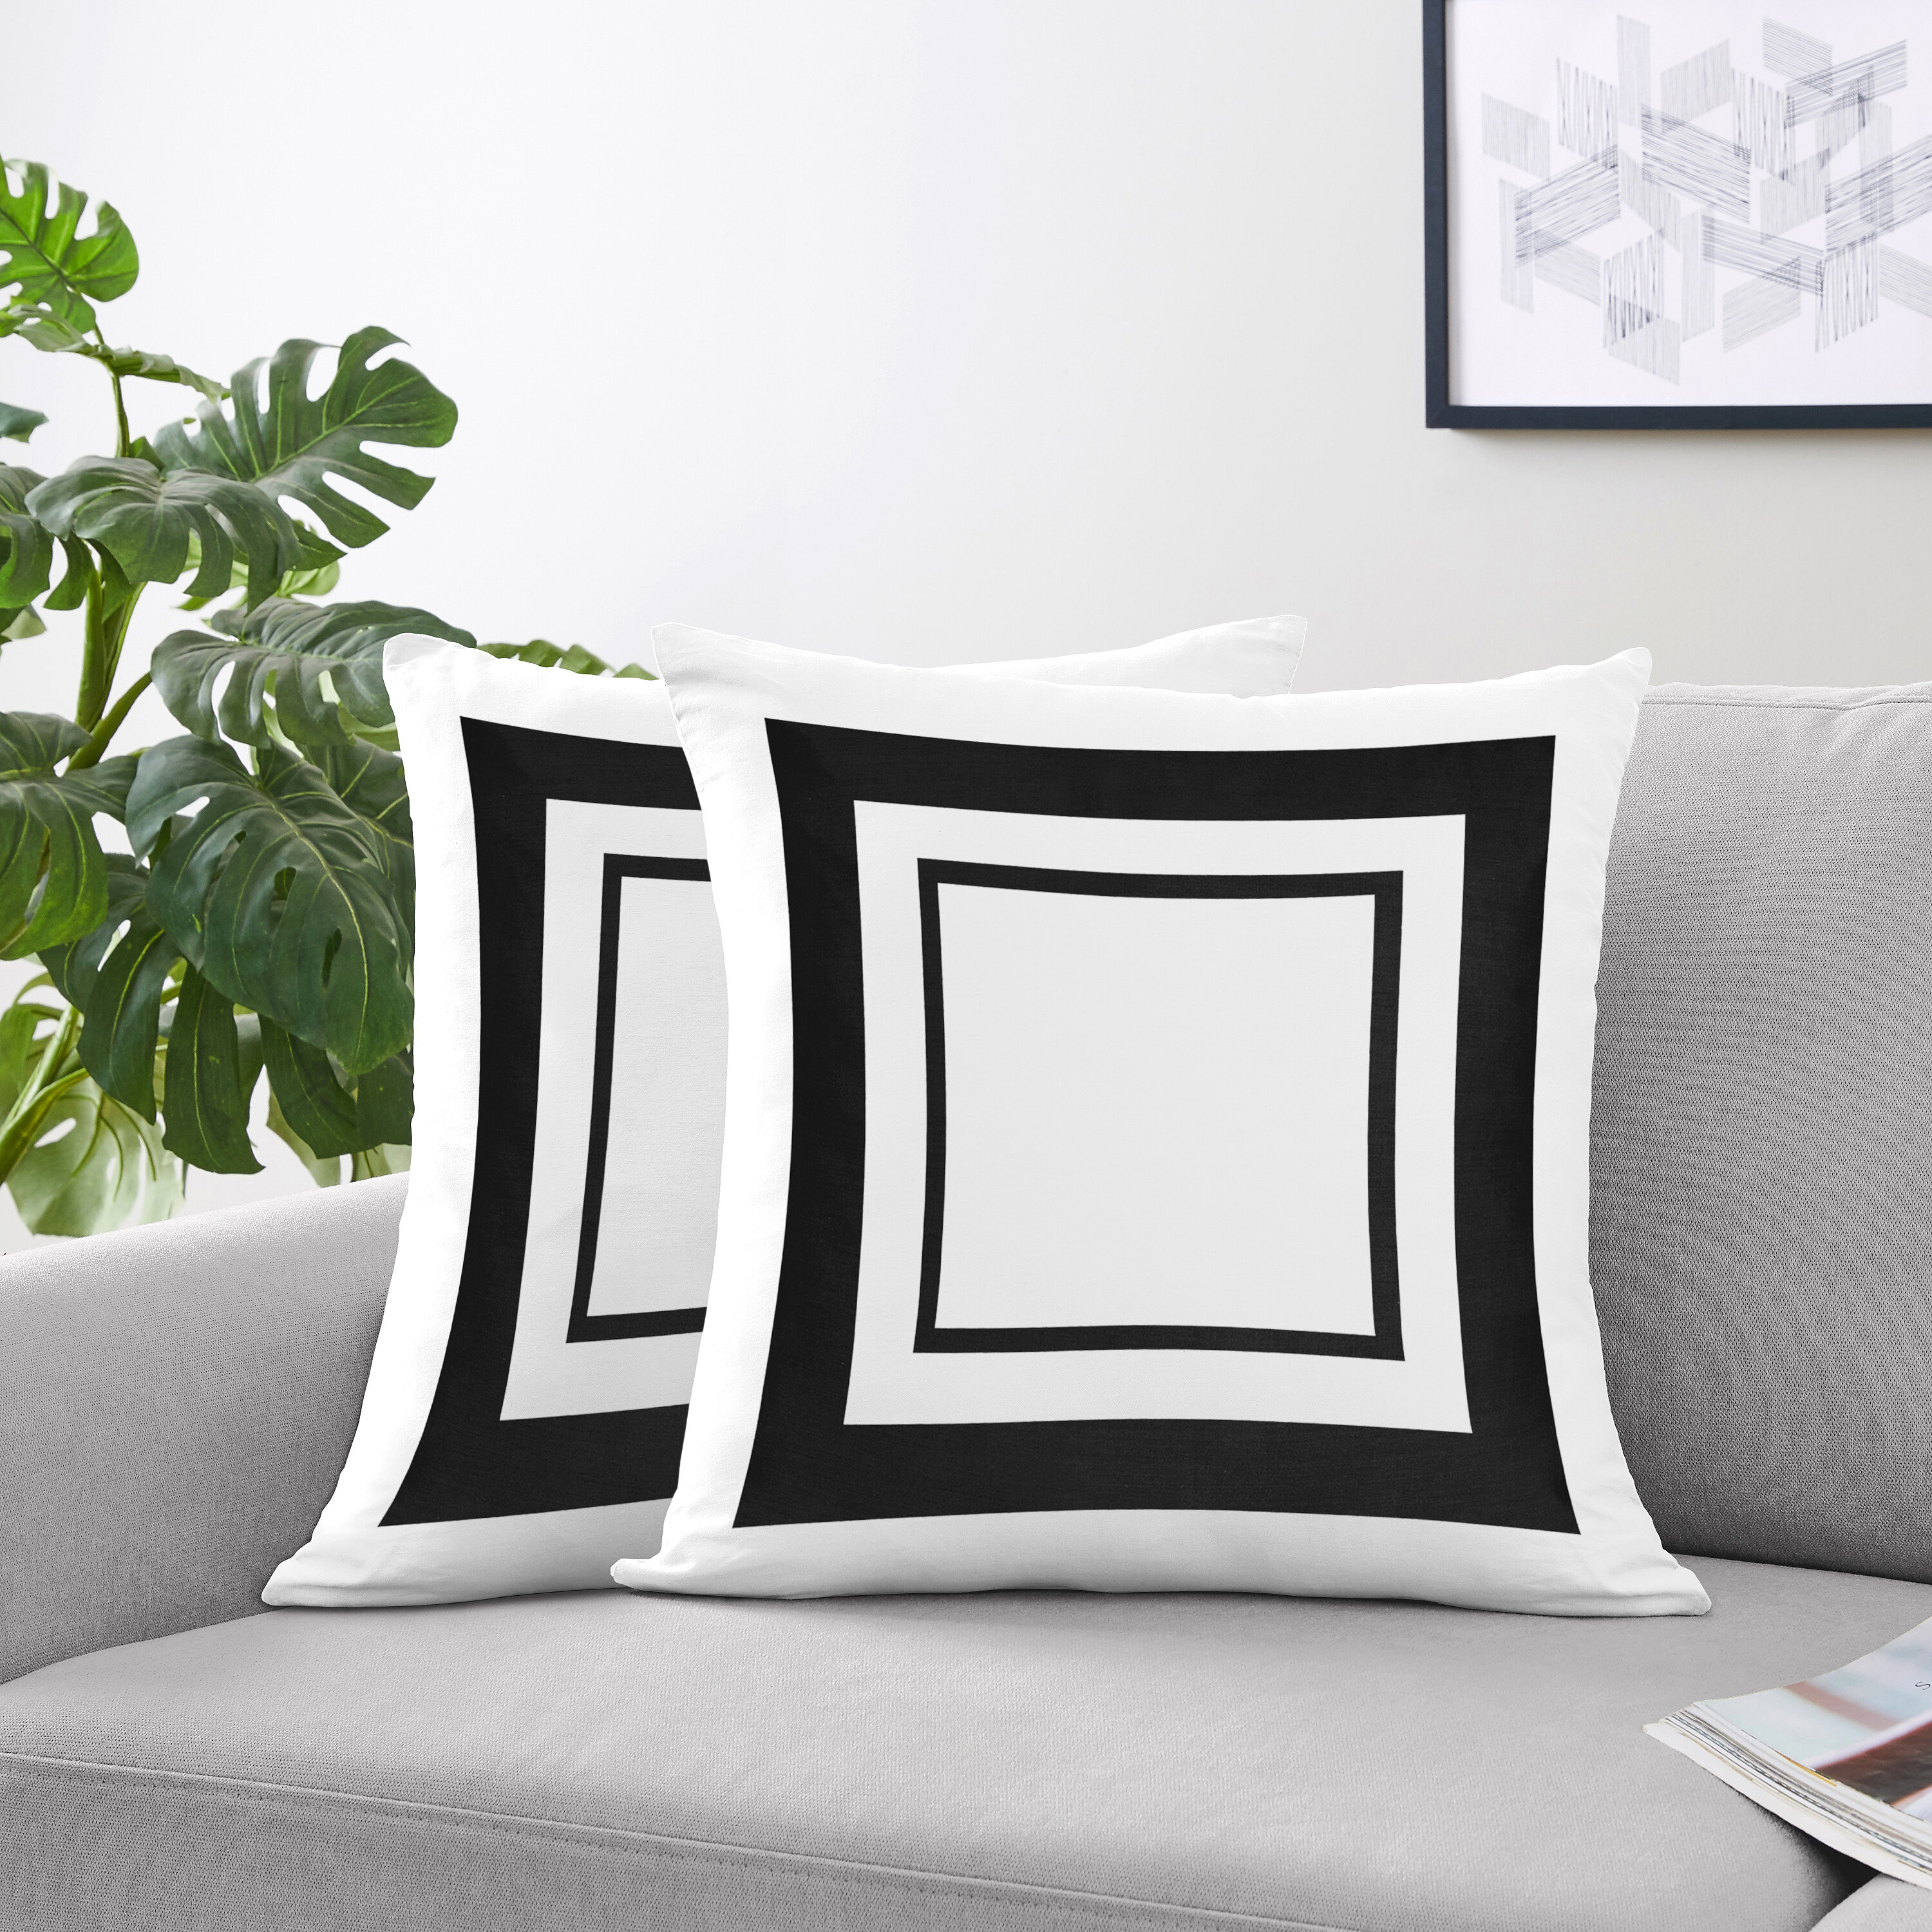 Sweet Jojo Designs Hotel White and Black Collection Decorative Accent Throw Pillows | Set of 2